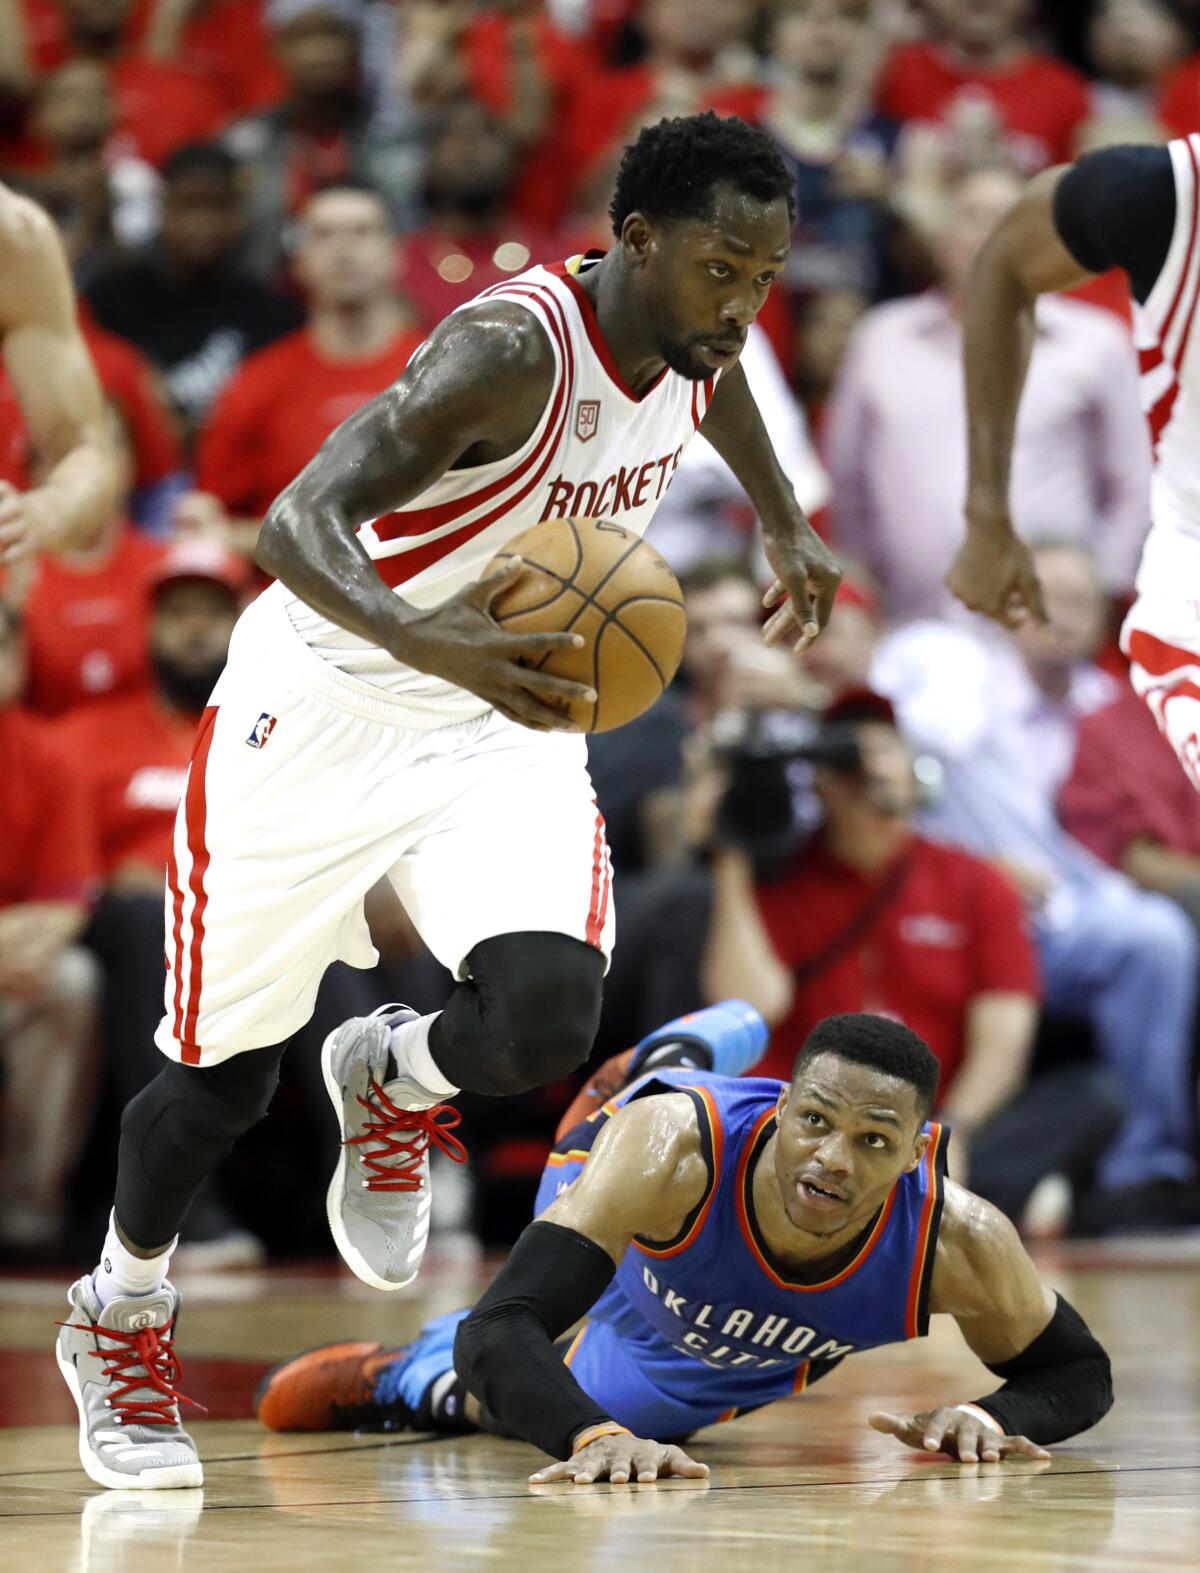 Patrick Beverley races away with the ball after stealing it from Russell Westbrook, who was left on the floor.